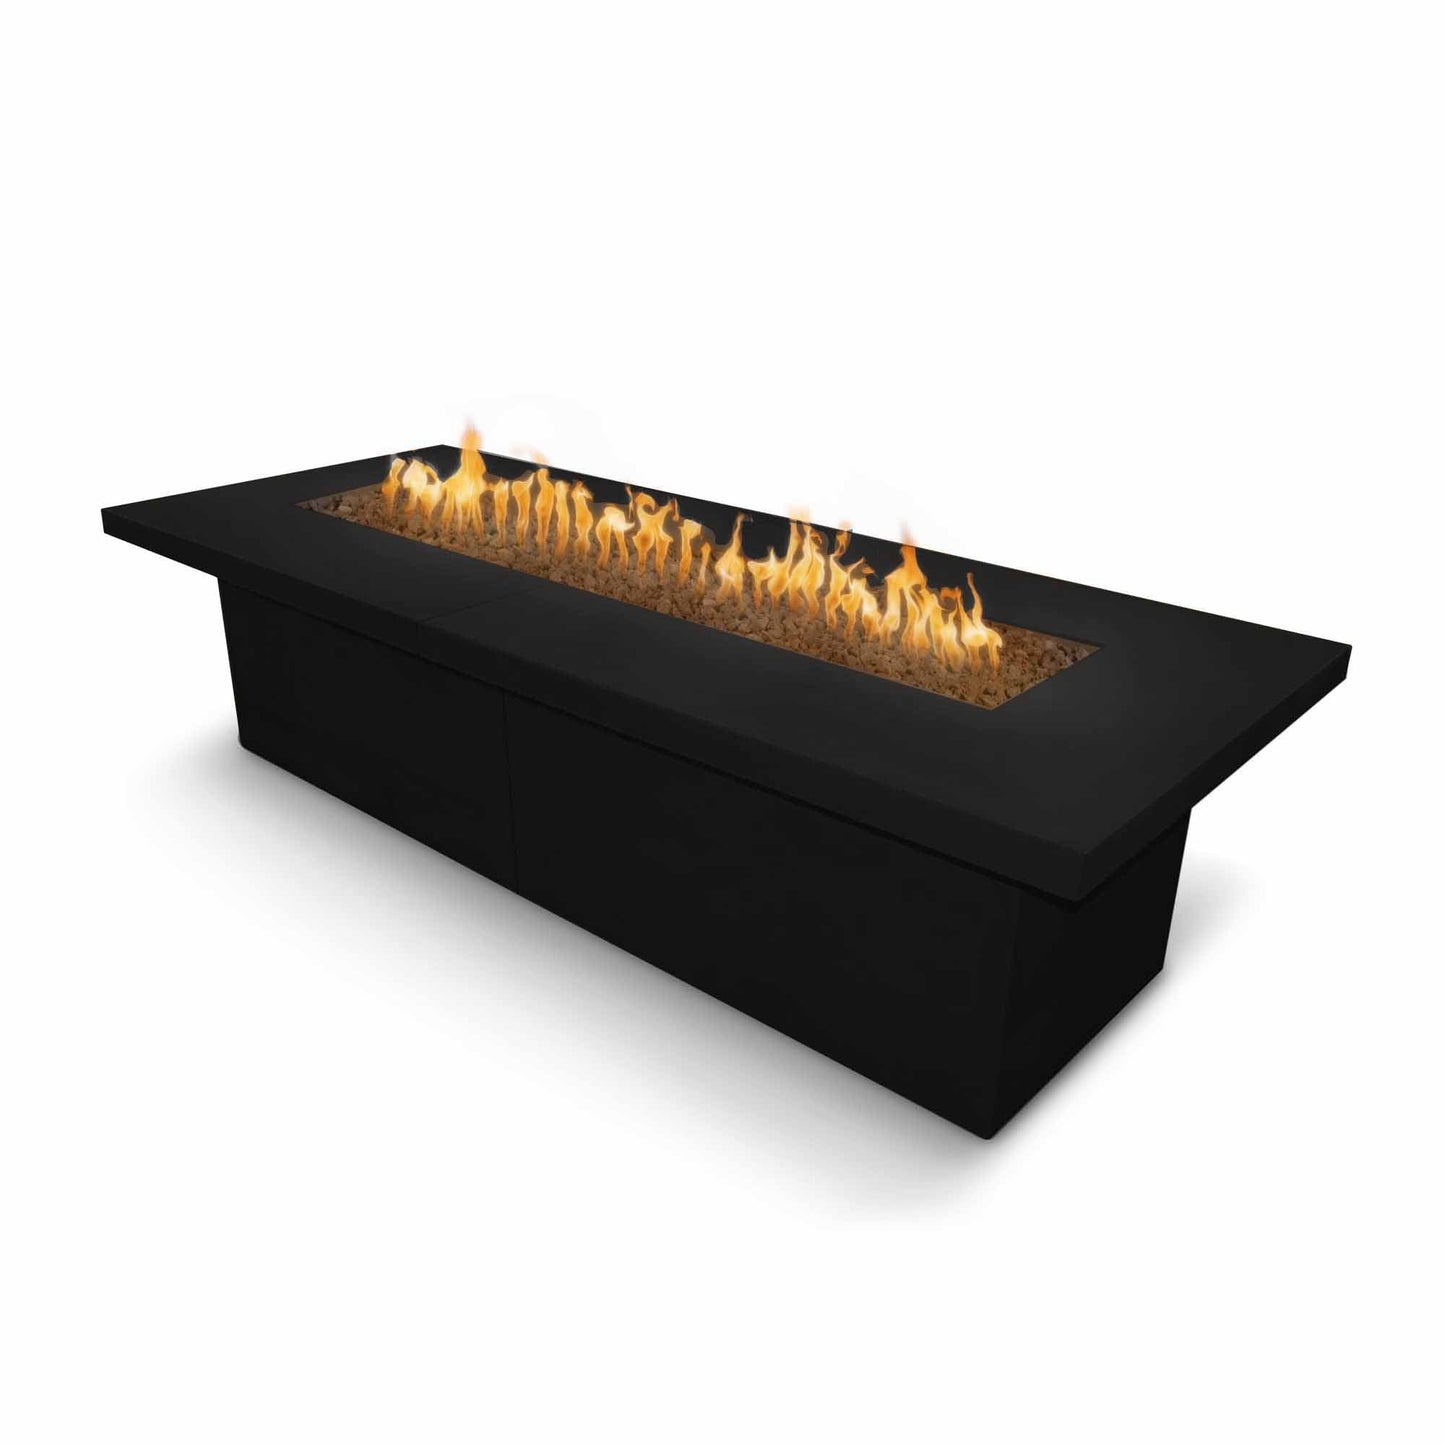 The Outdoor Plus Rectangular Newport 144" Stainless Steel Natural Gas Fire Pit with 110V Electronic Ignition